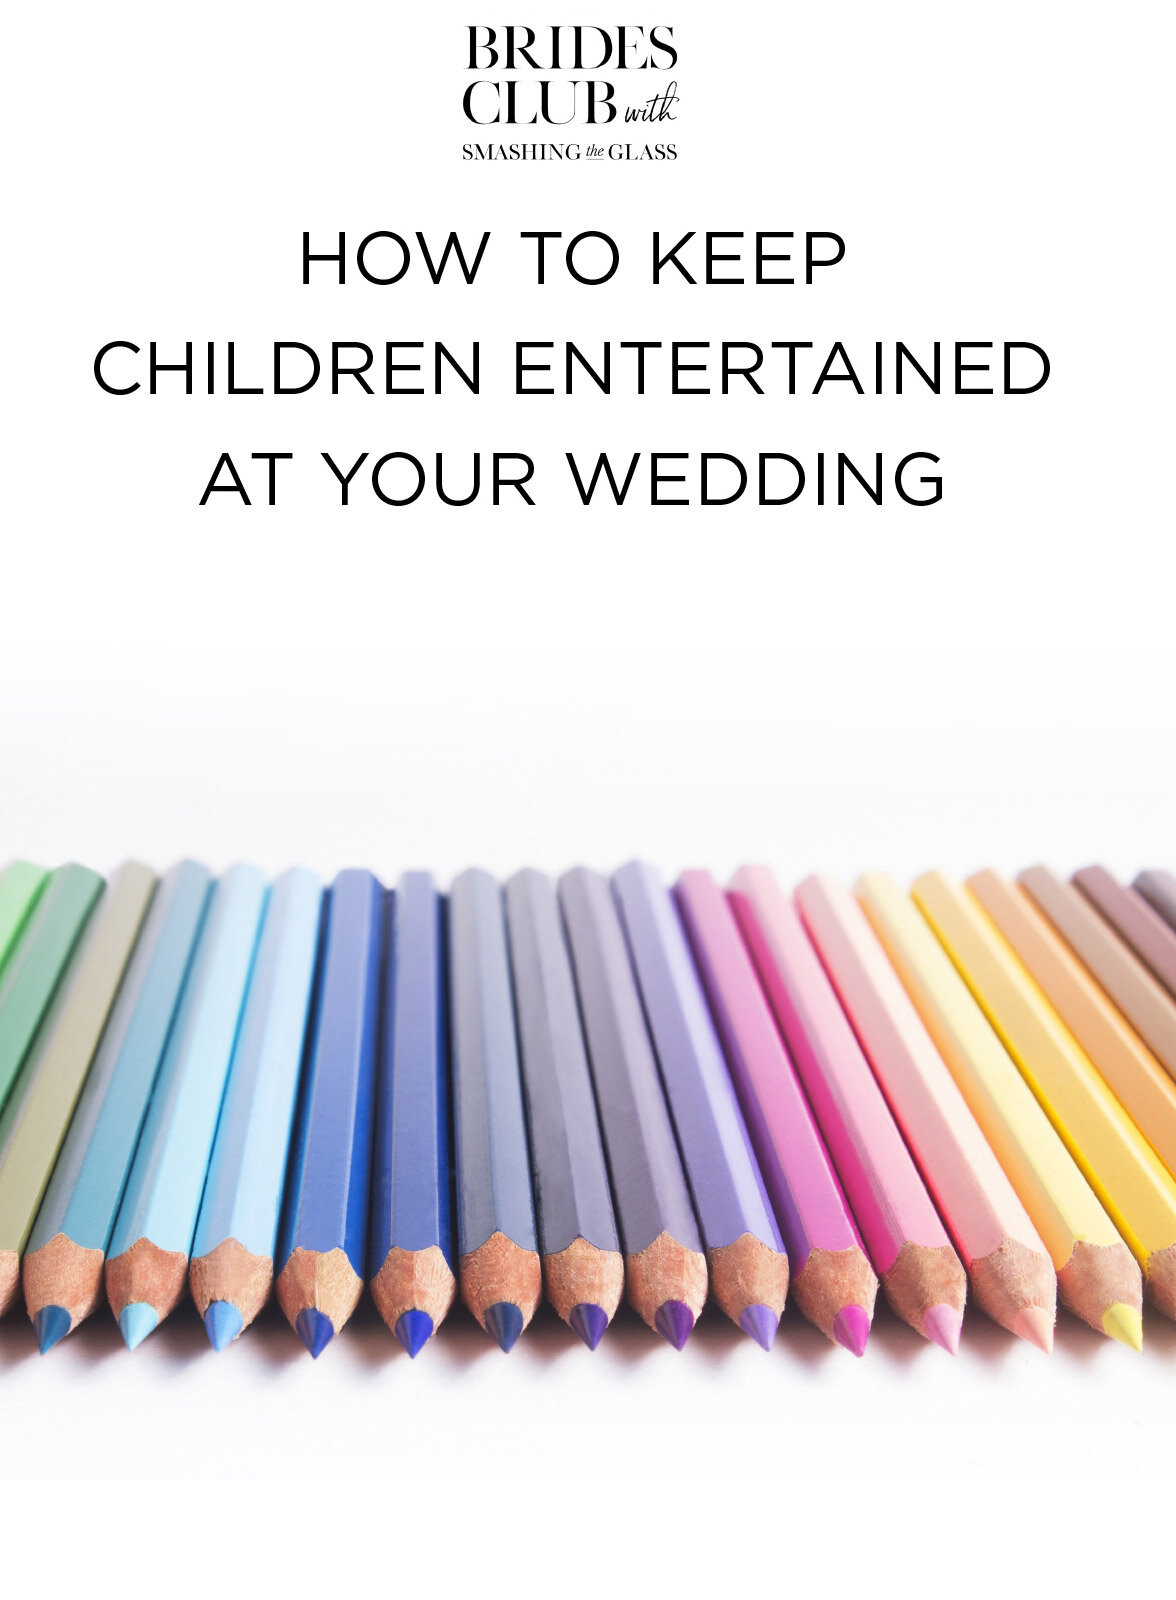 How to Keep Children Entertained at Your Wedding